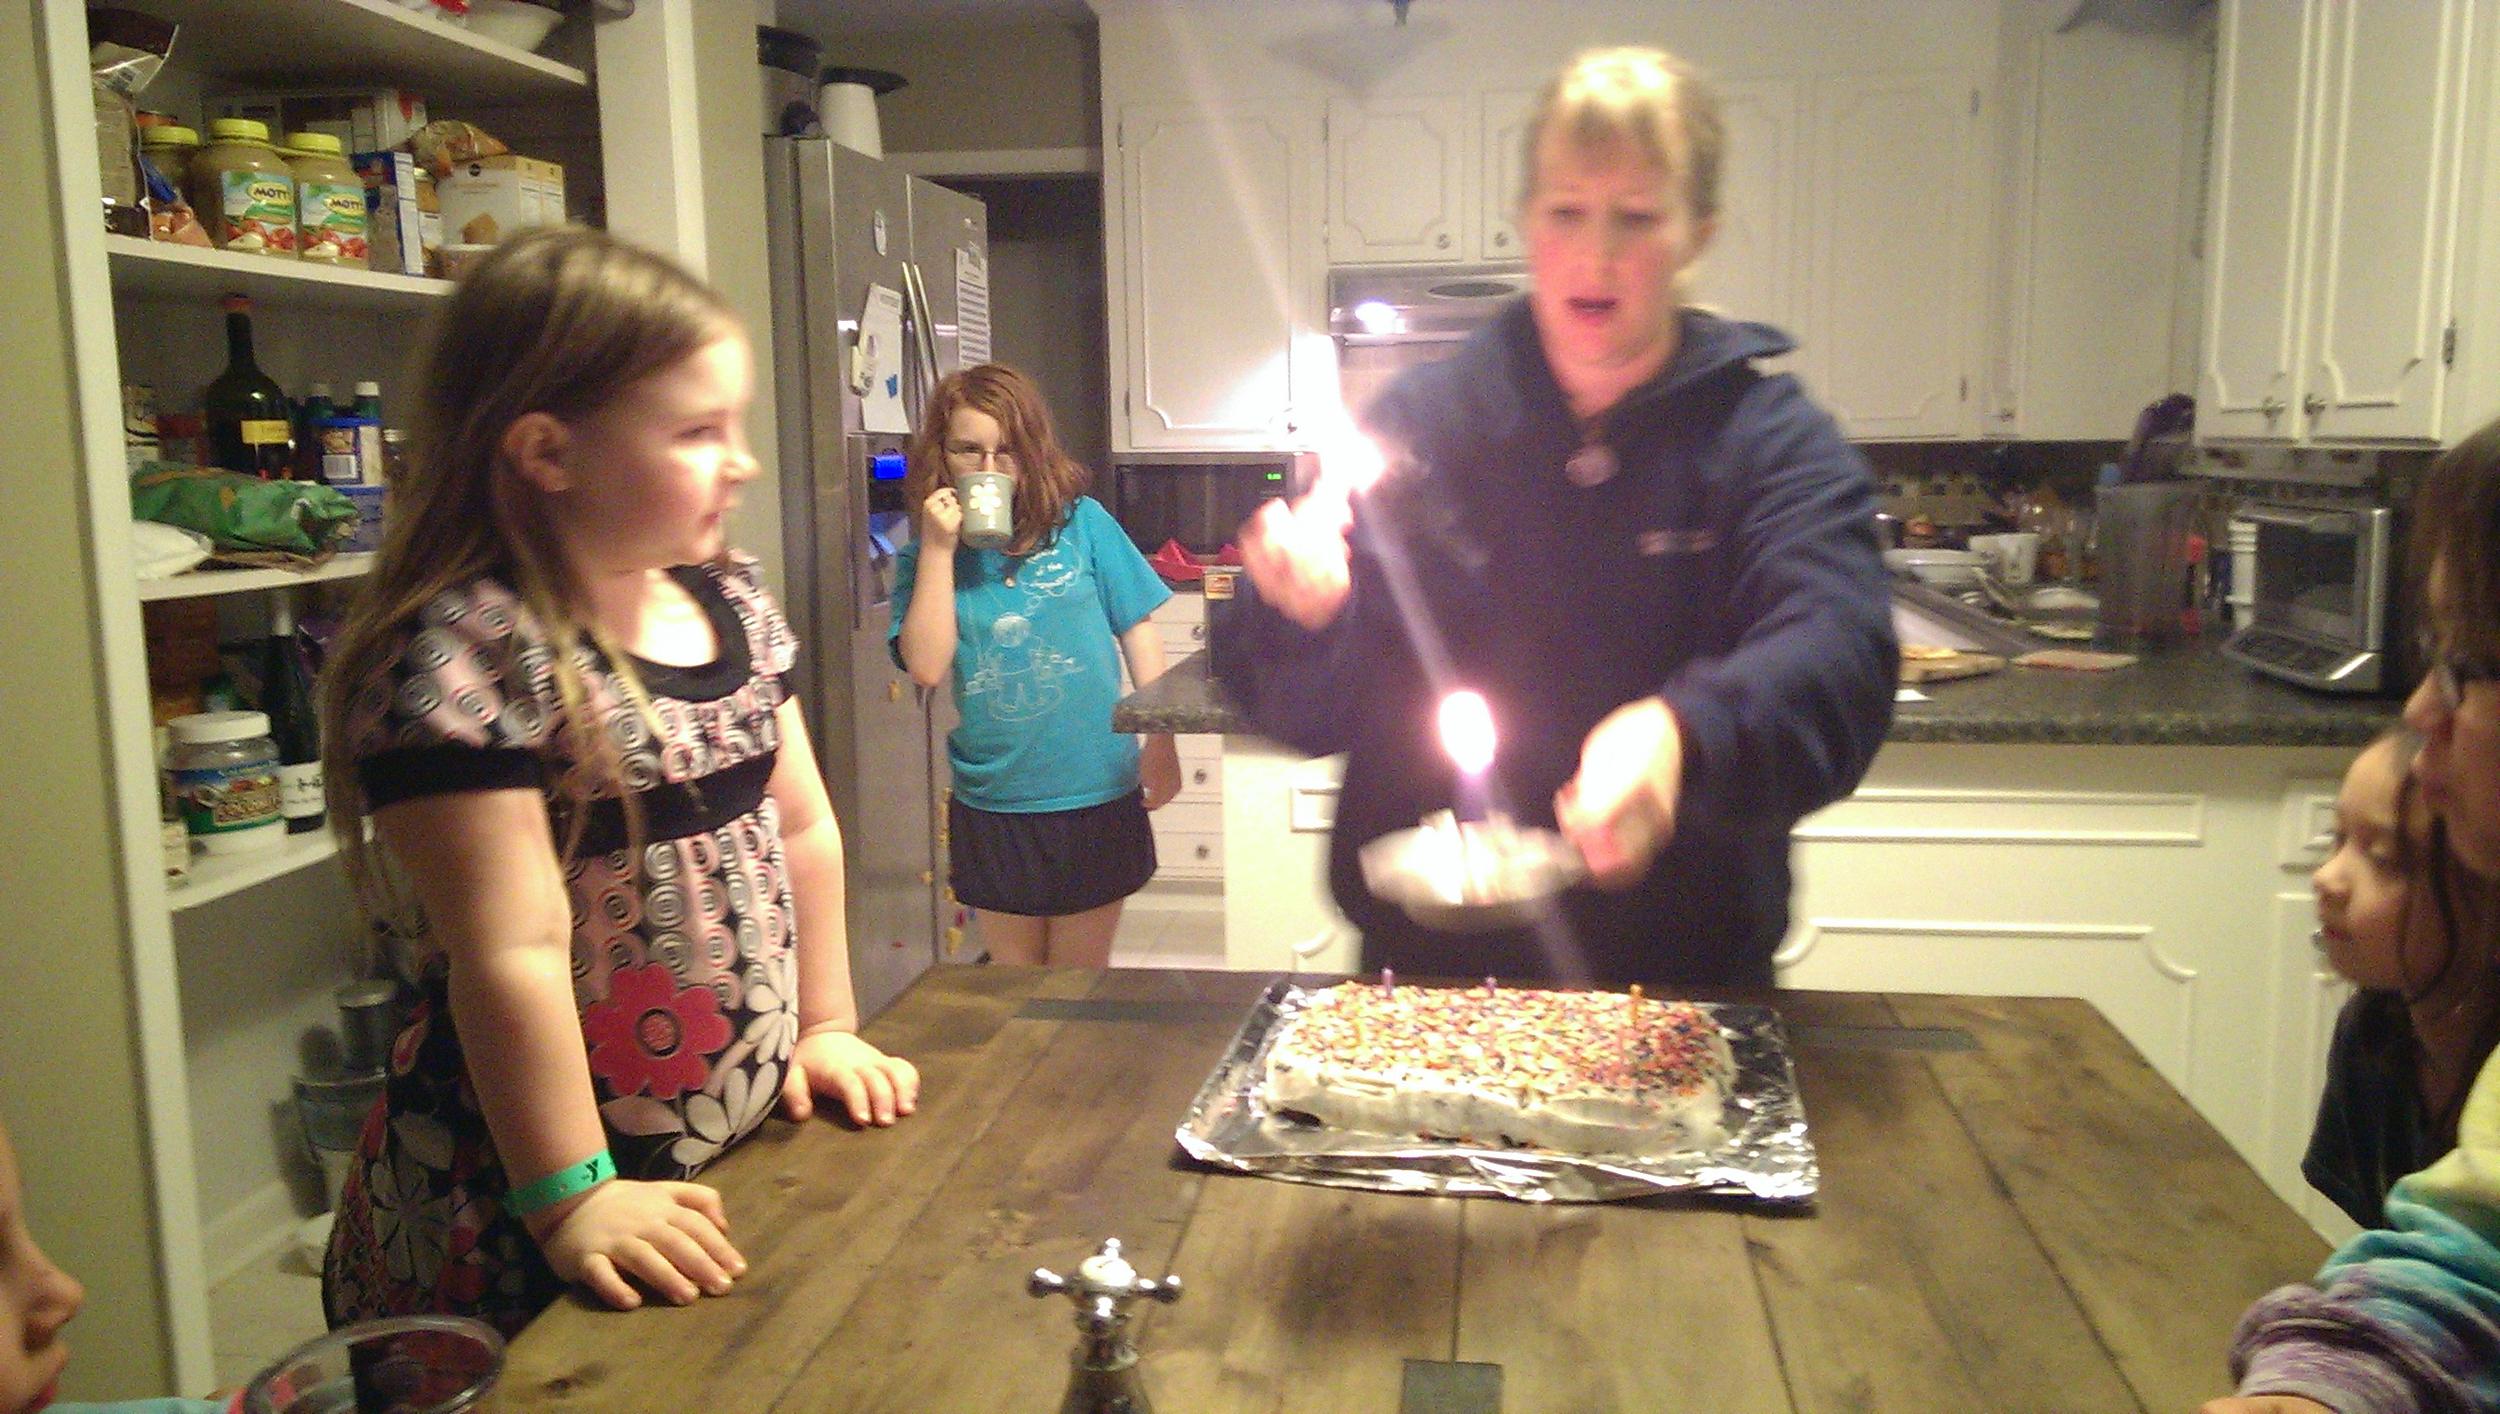 Blowing out one candle...lighting the cake.